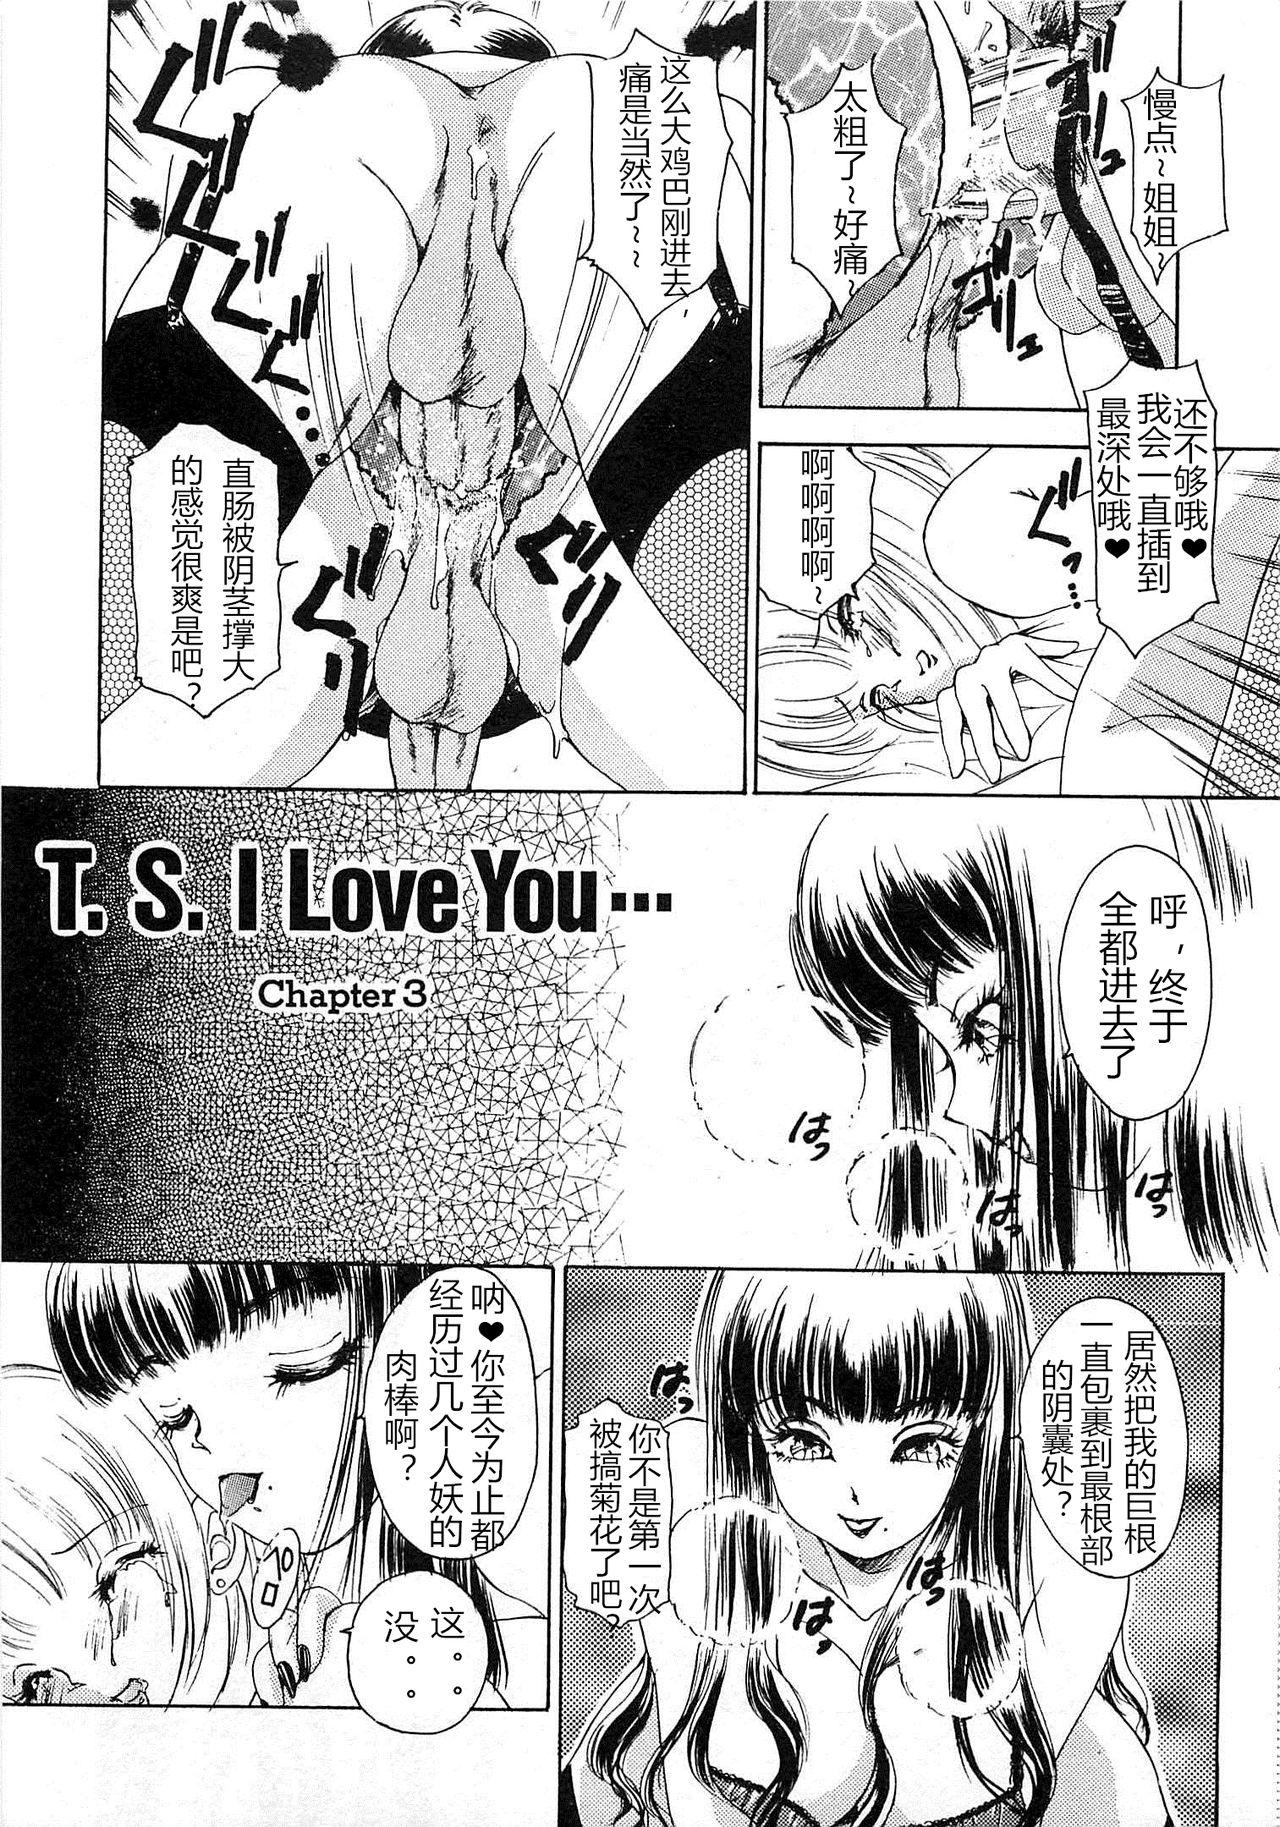 T.S. I LOVE YOU chapter 03 2